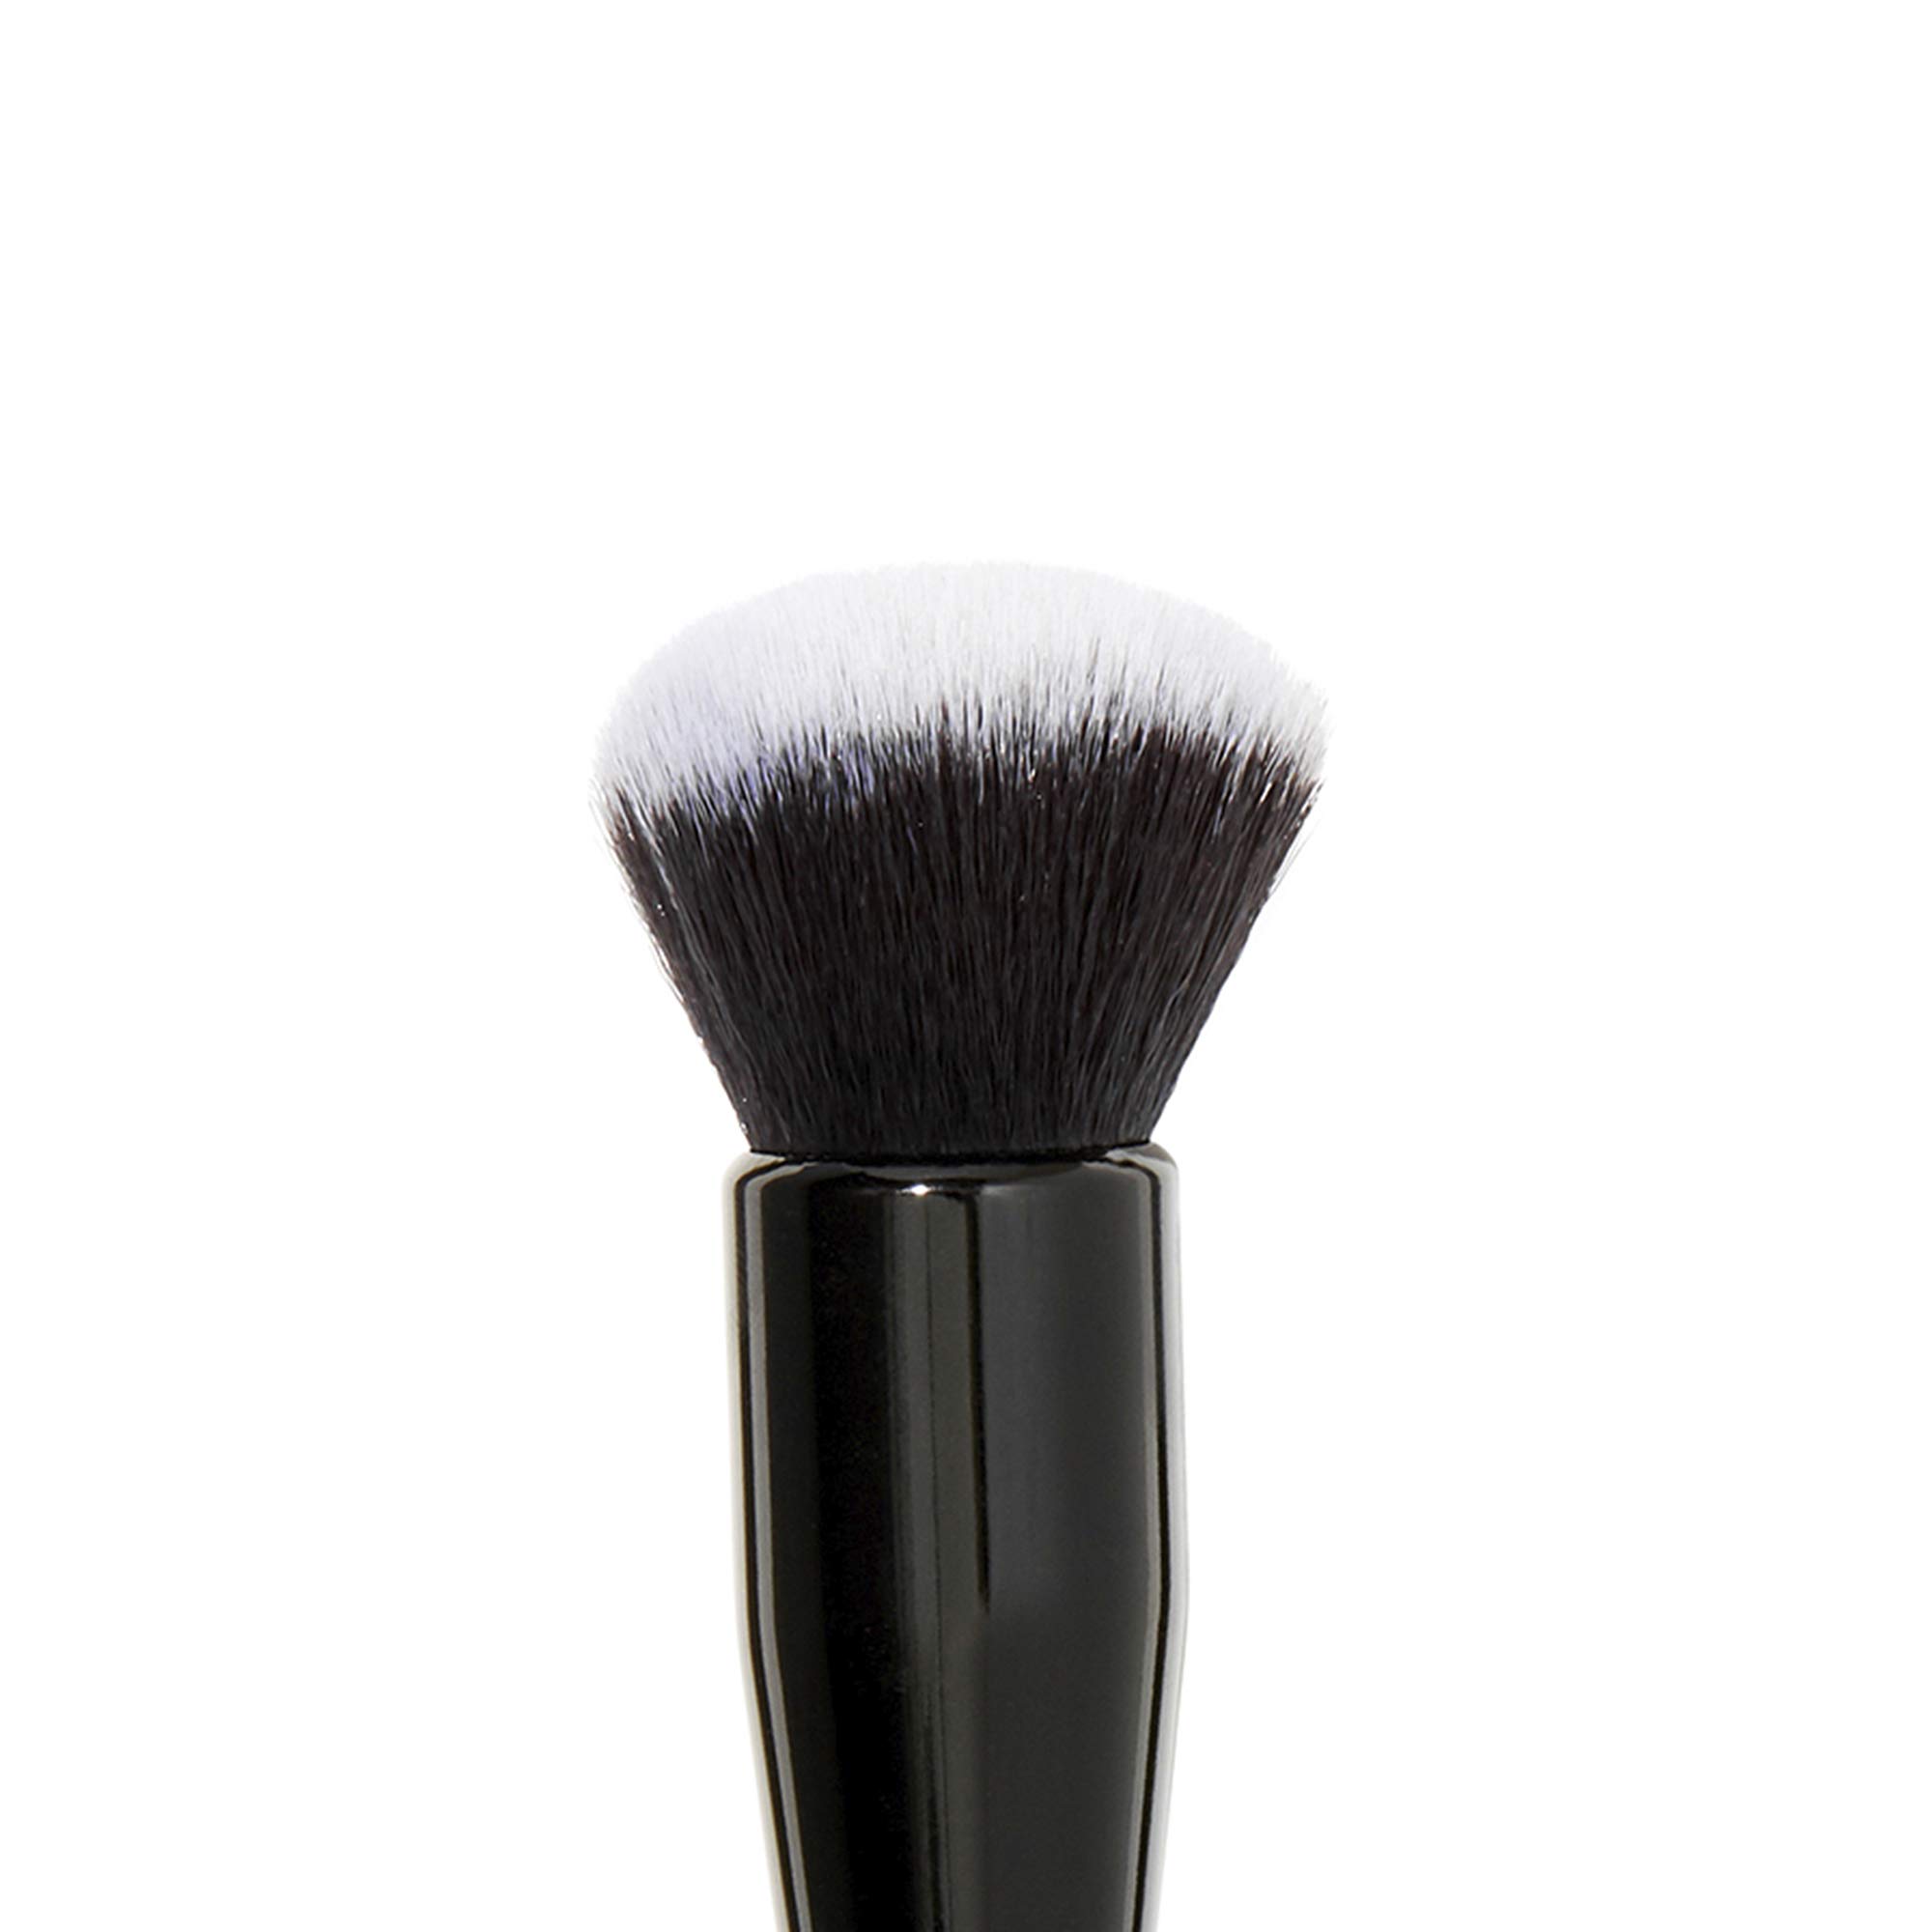 e.l.f. Ultimate Blending Brush, Dome-Shaped Makeup Tool For Applying & Blending Foundation, Bronzer & Blush, Made With Vegan, Cruelty-Free Bristles